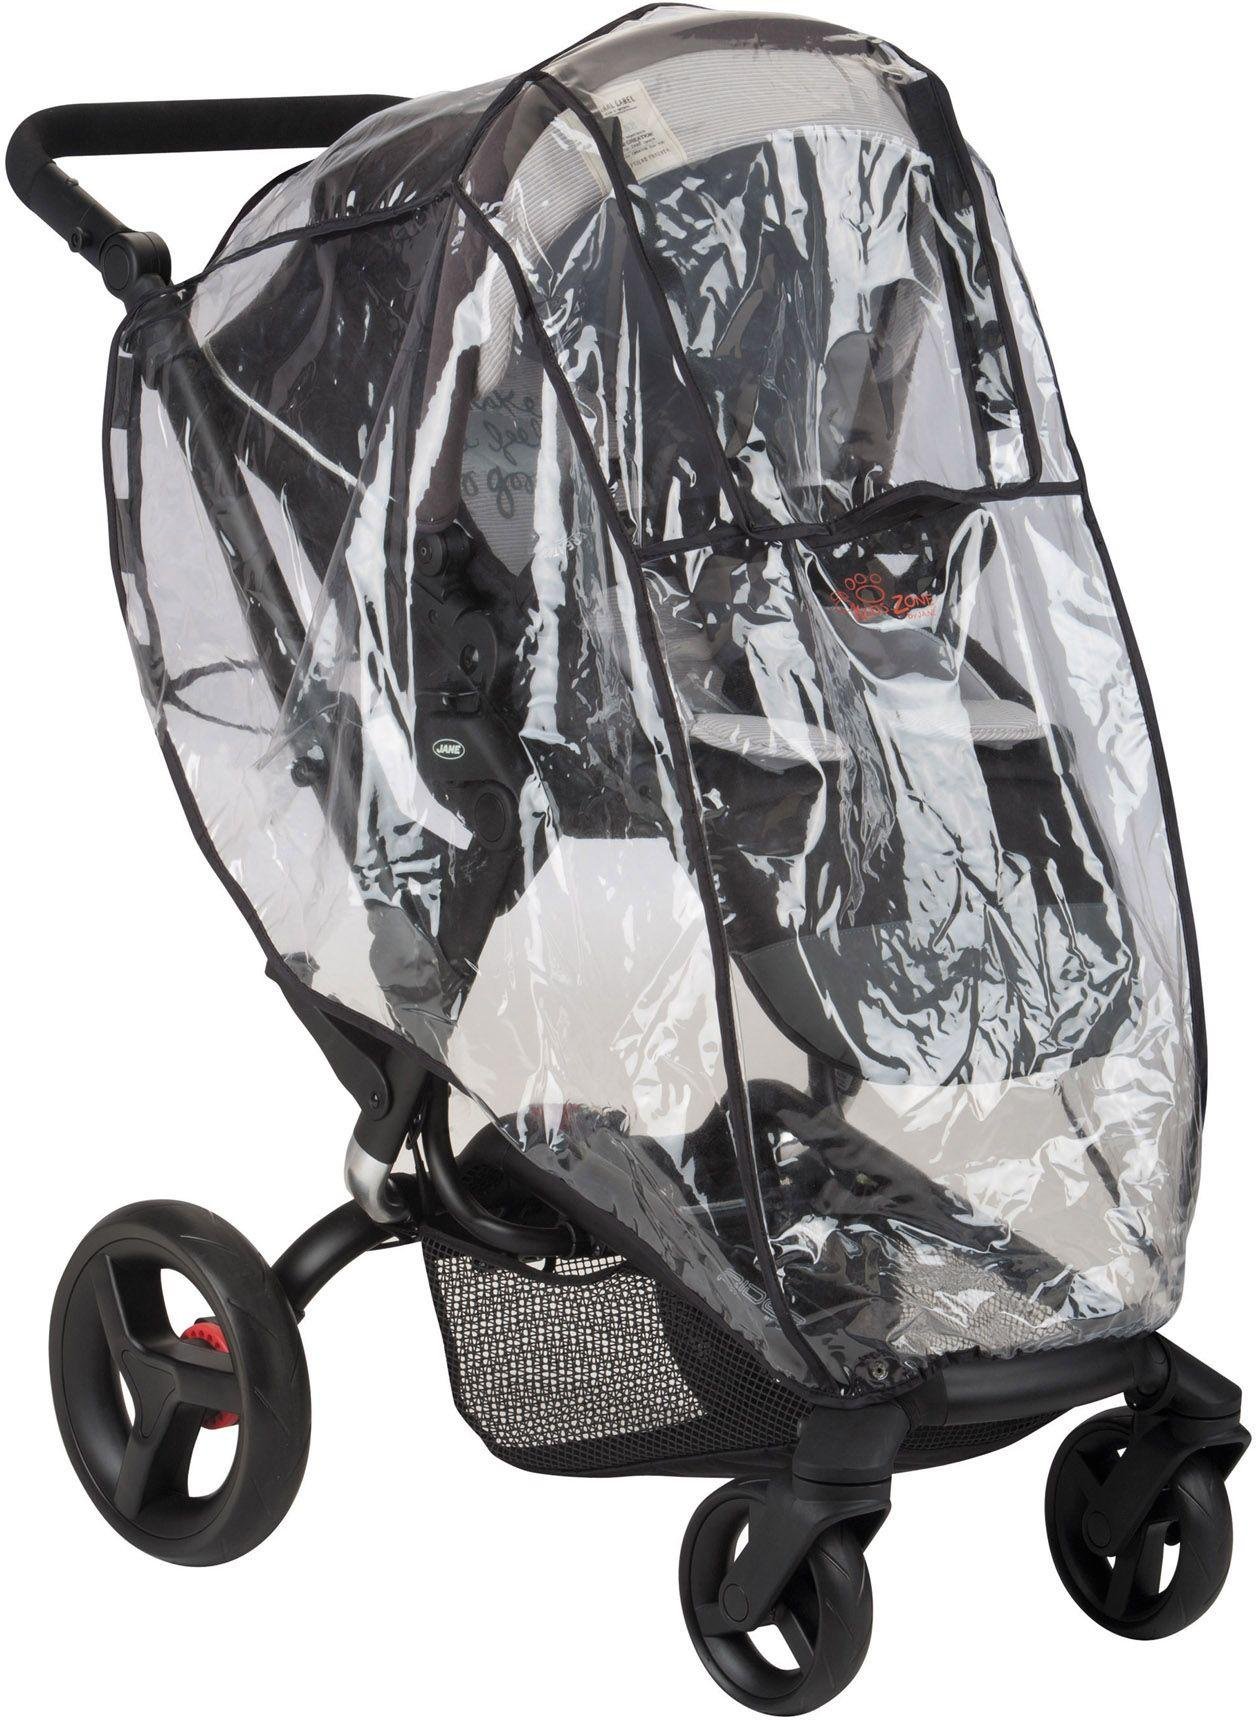 Jane Universal Raincover for Pushchairs. Review